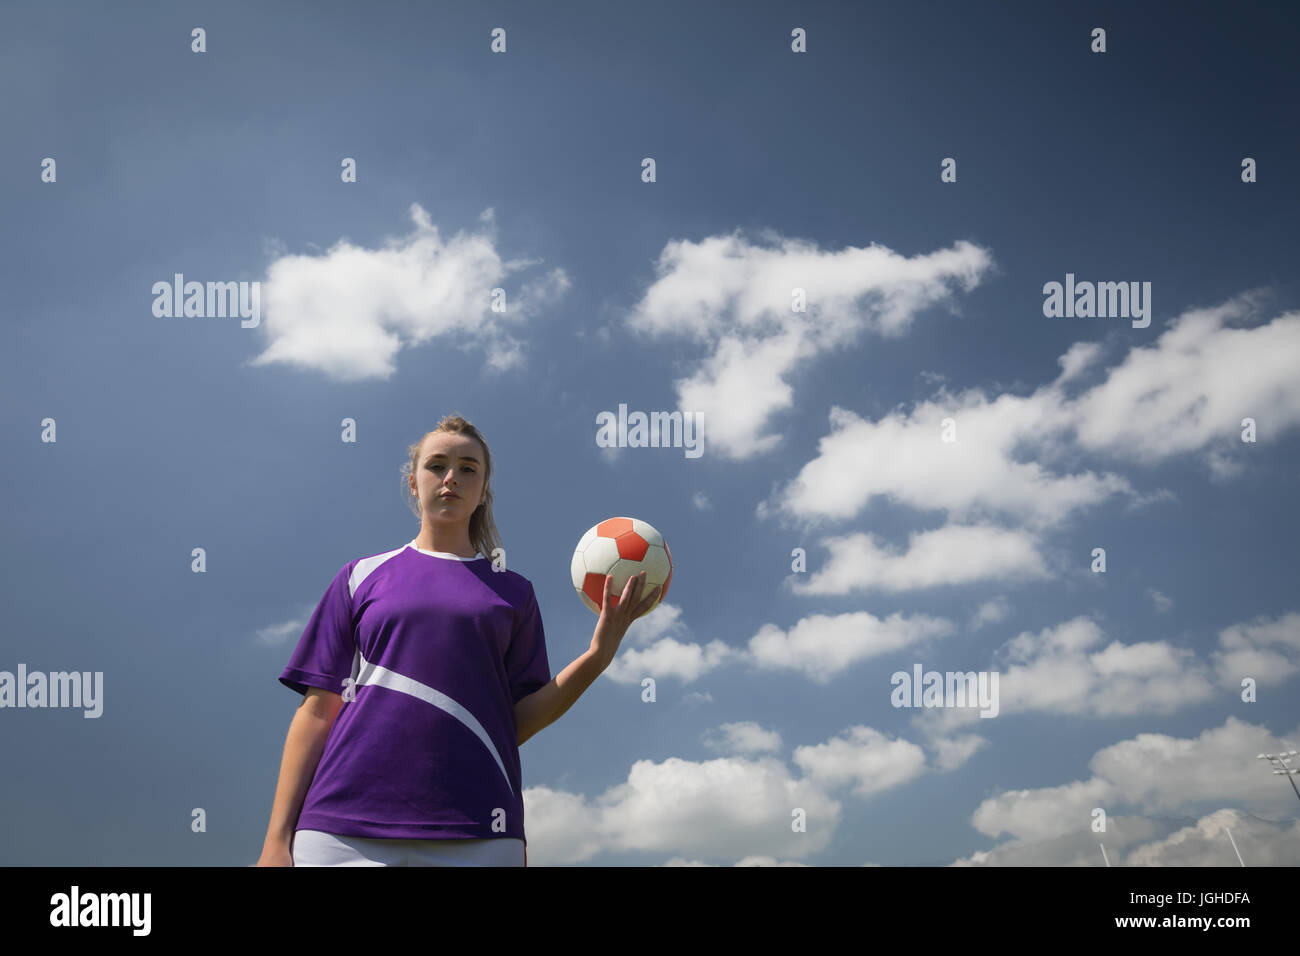 Low angle view of young woman holding soccer ball against cloudy sky Banque D'Images